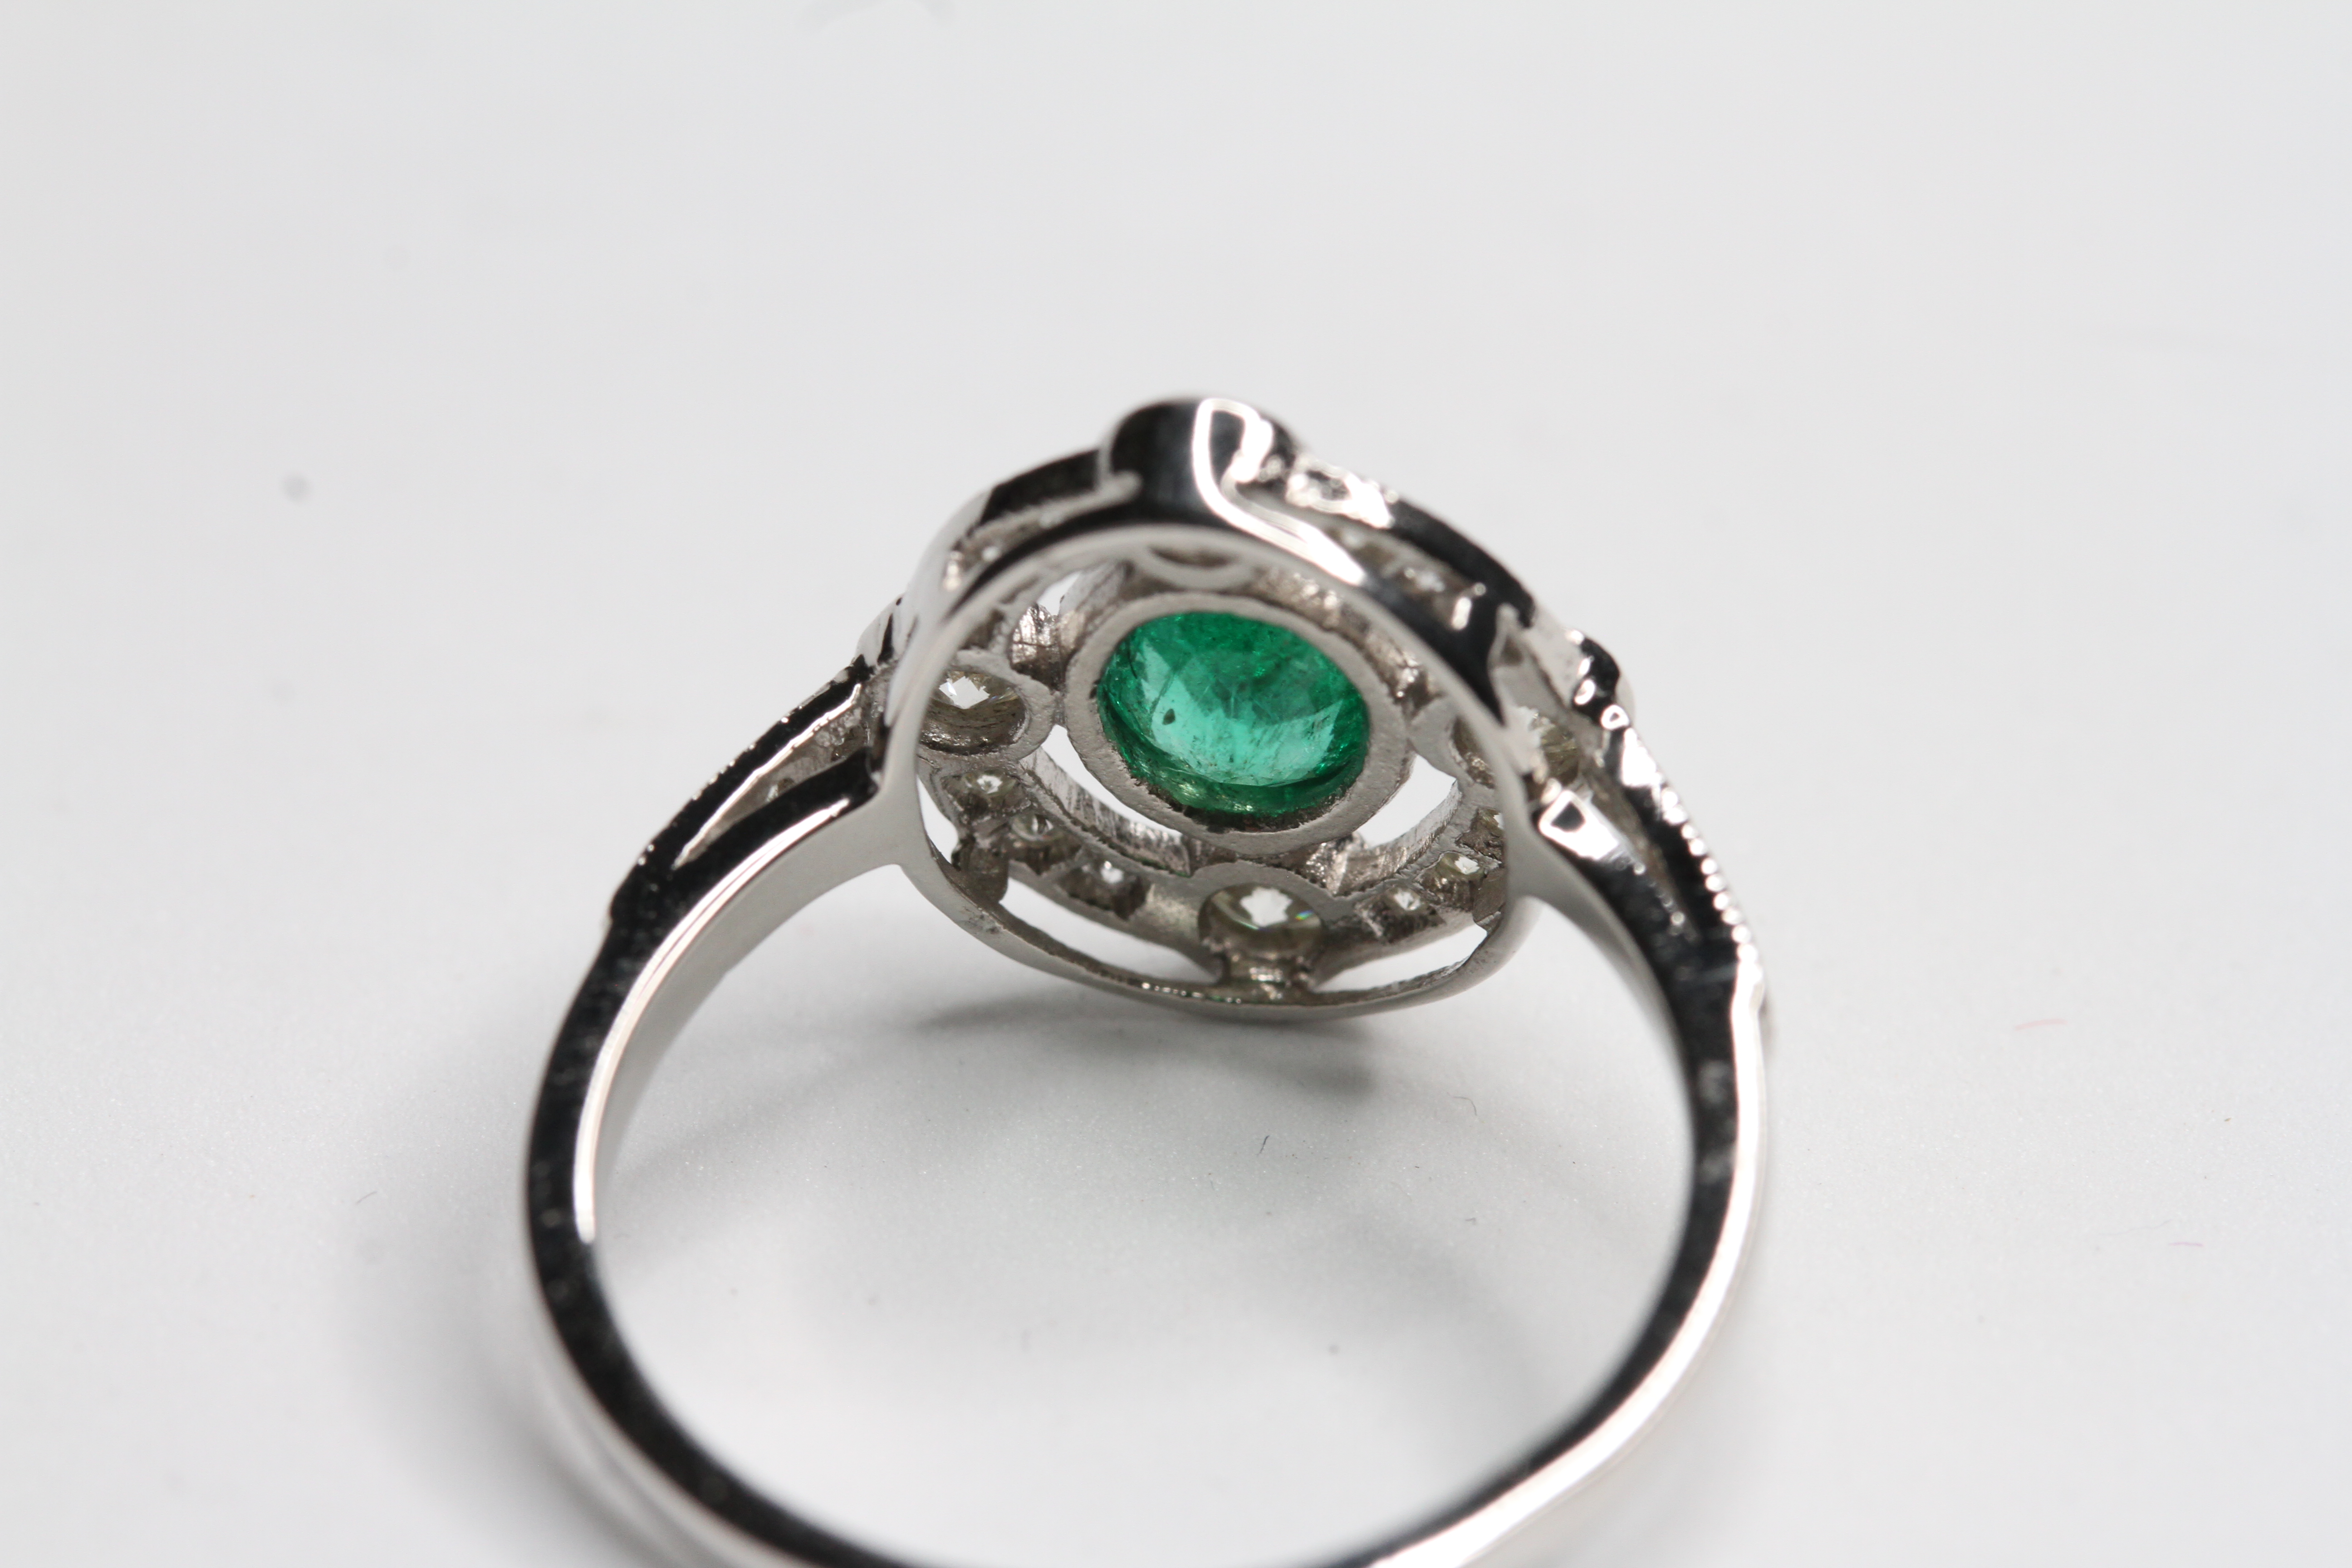 Platinum Oval Emerald and diamond ring with 4 focal point raised bezel set diamond in an open halo - Image 2 of 2